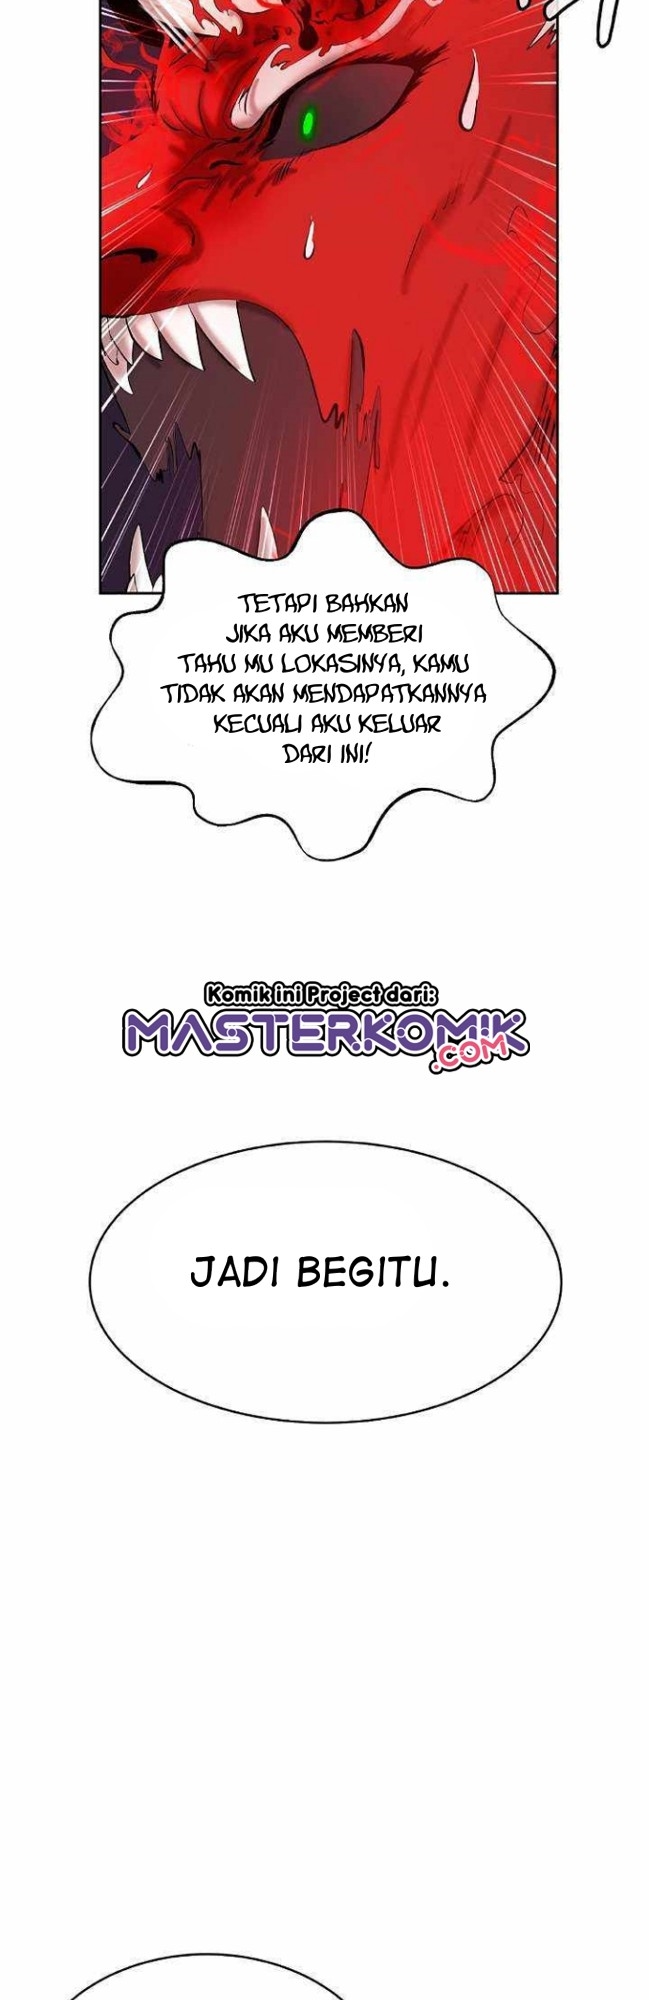 Cystic Story Chapter 34